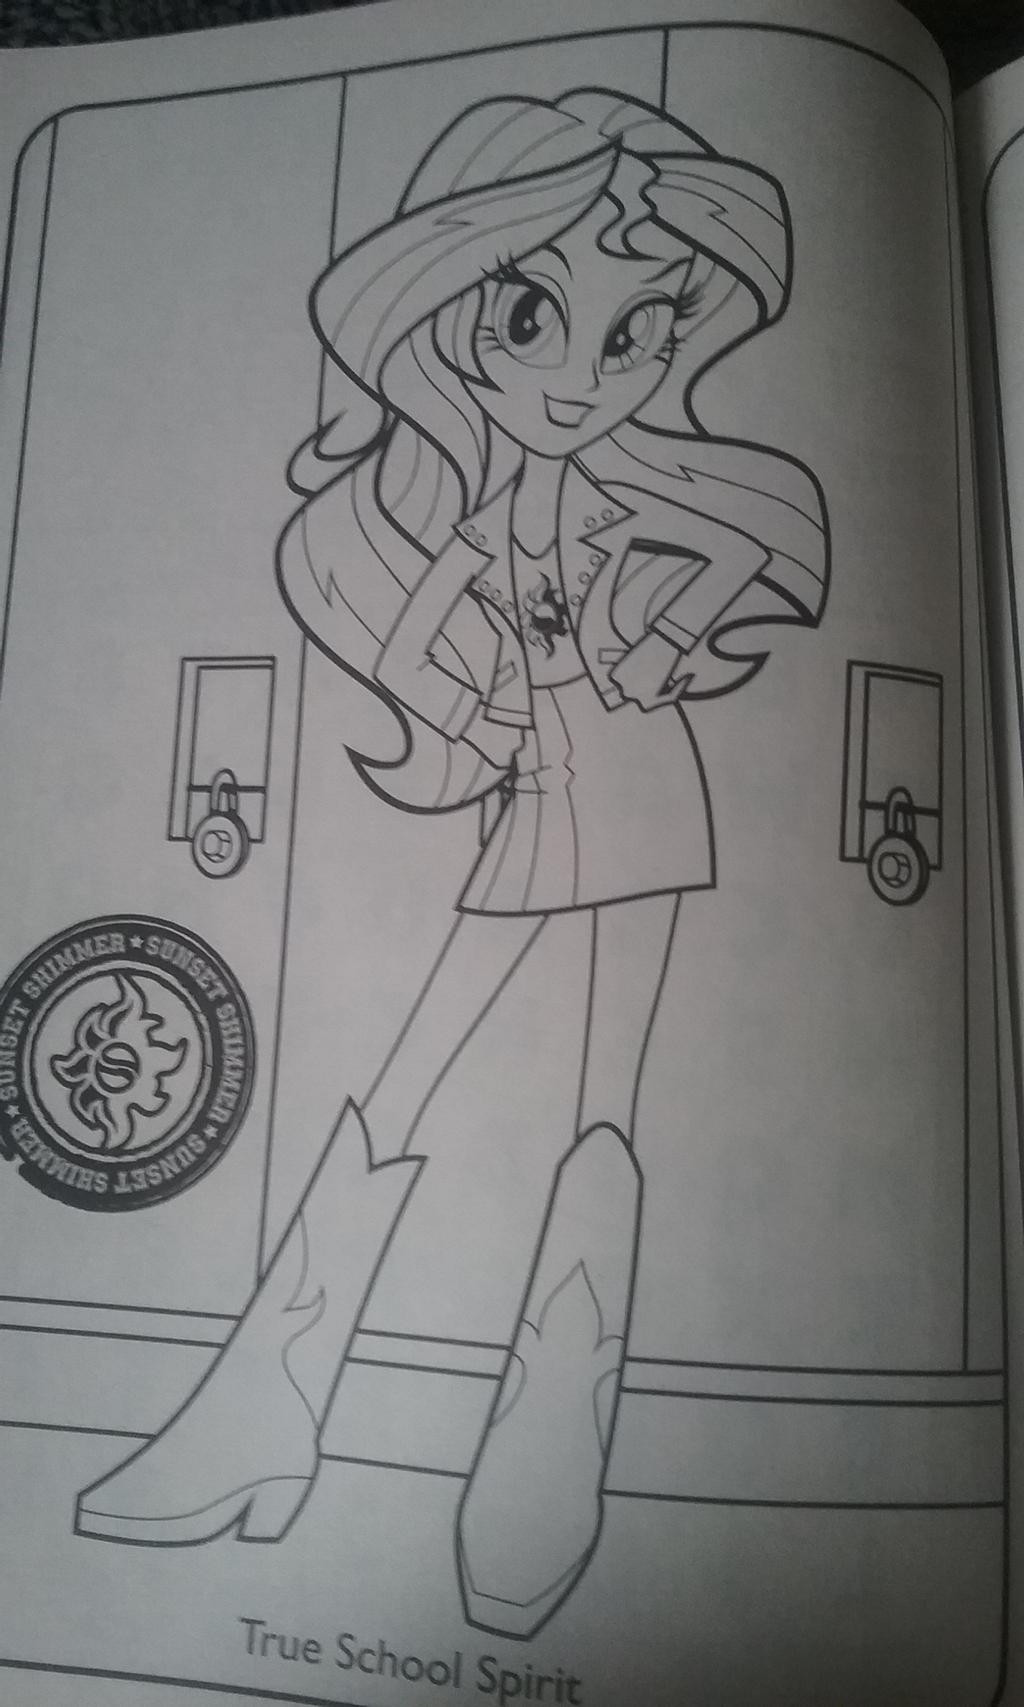 Equestria Girls Sunset Shimmer Coloring Pages
 Equestria Girls Sunset Shimmer Coloring Page 2 by